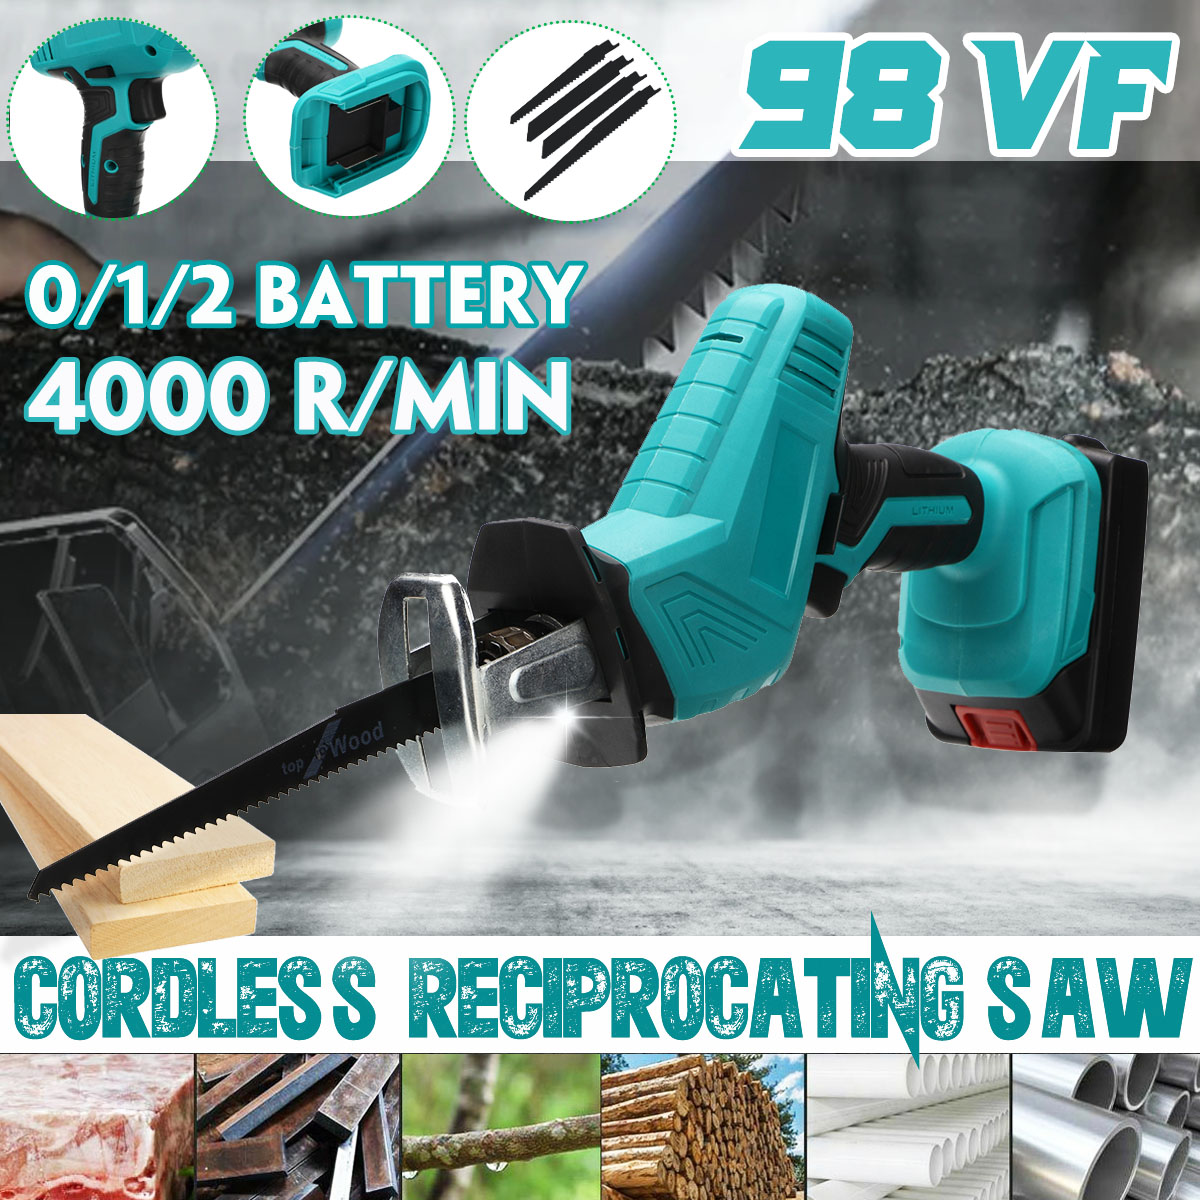 Cordless-Reciprocating-Saw-W-None12-Battery-For-Makita--4pcs-Saw-Blades-Woodworking-Wood-Cutter-Elec-1879913-2